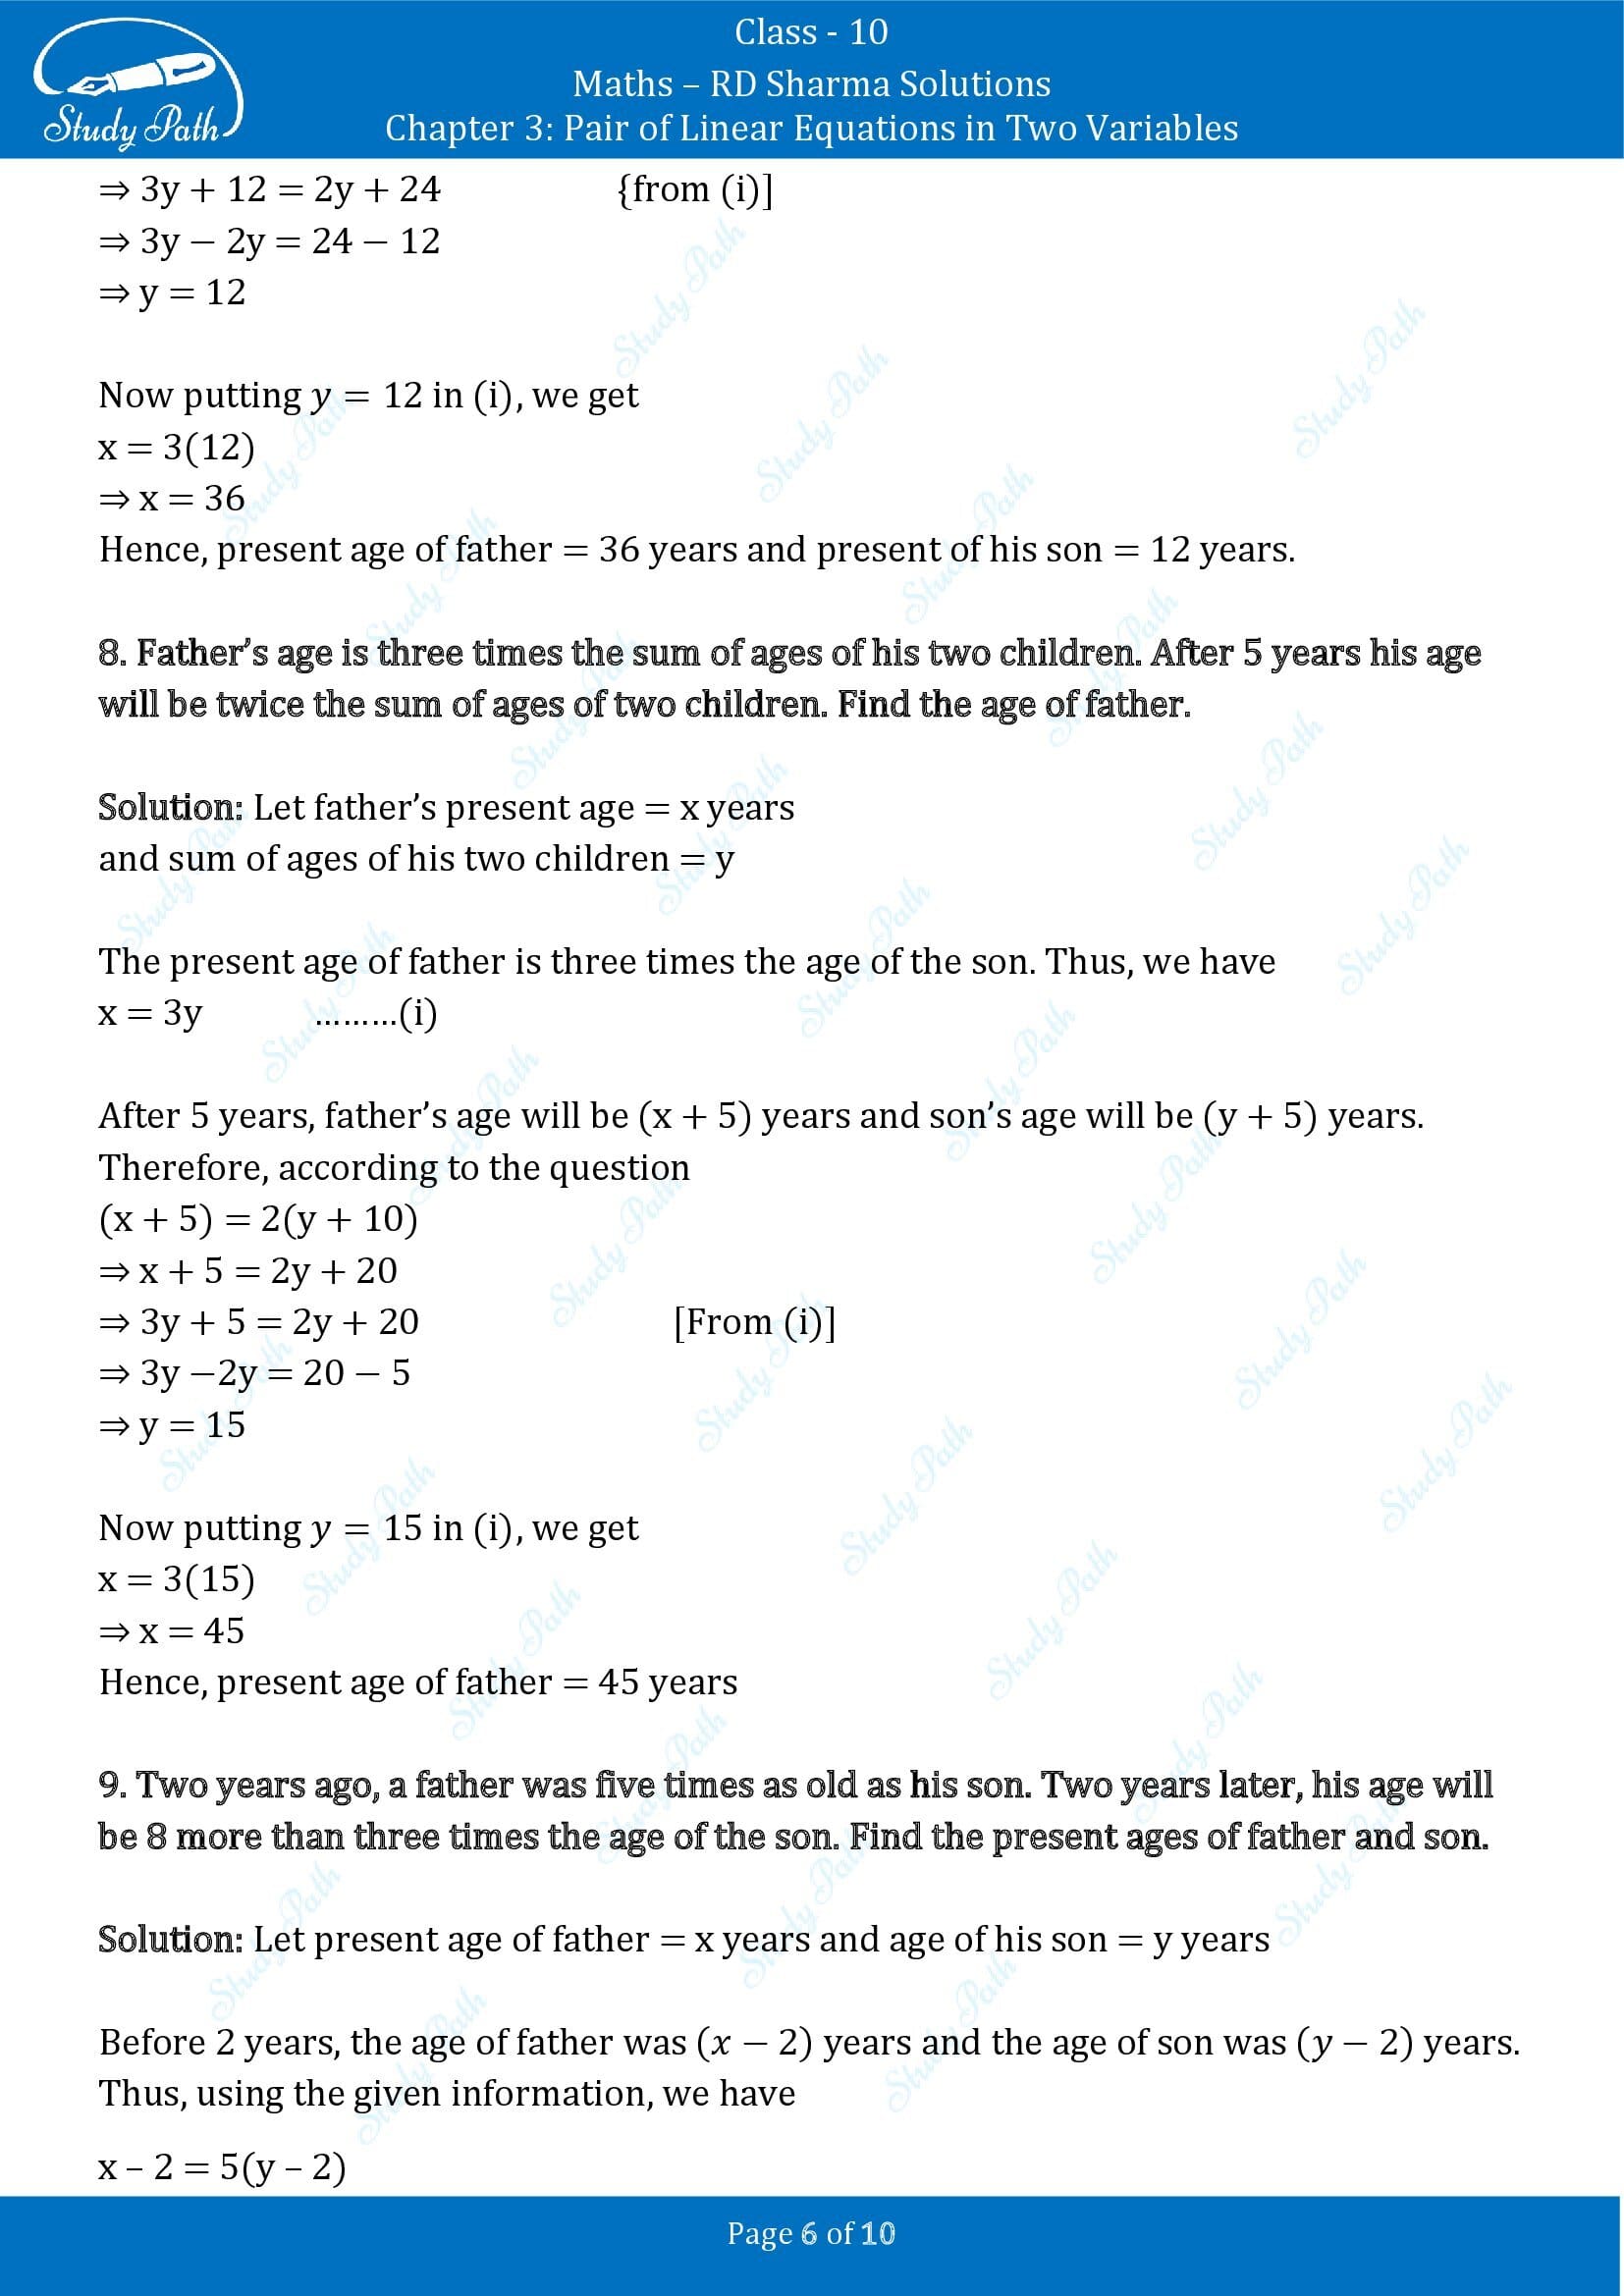 RD Sharma Solutions Class 10 Chapter 3 Pair of Linear Equations in Two Variables Exercise 3.9 00006